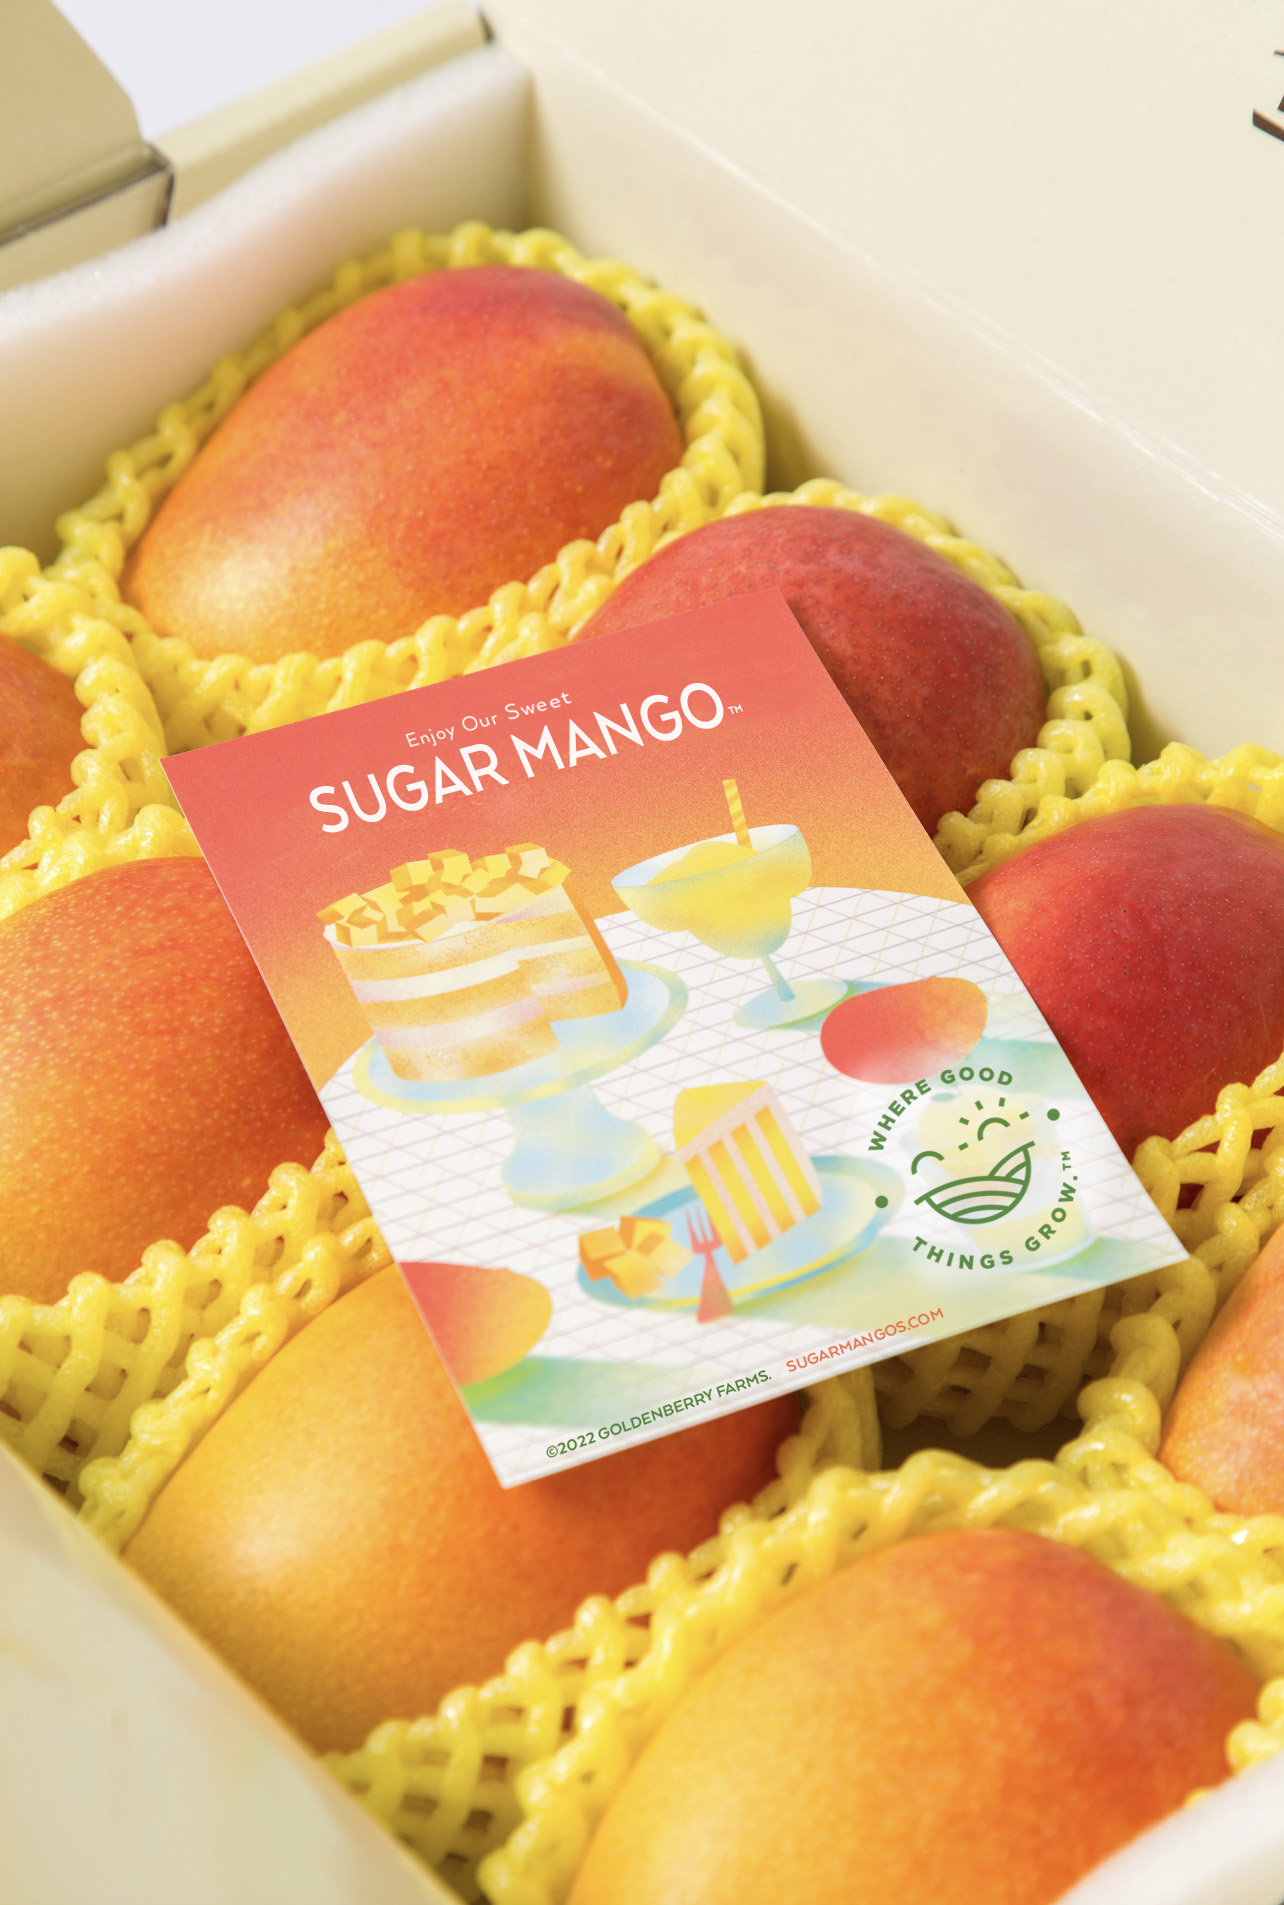 Sweet Sugar Mangos in special limited edition box